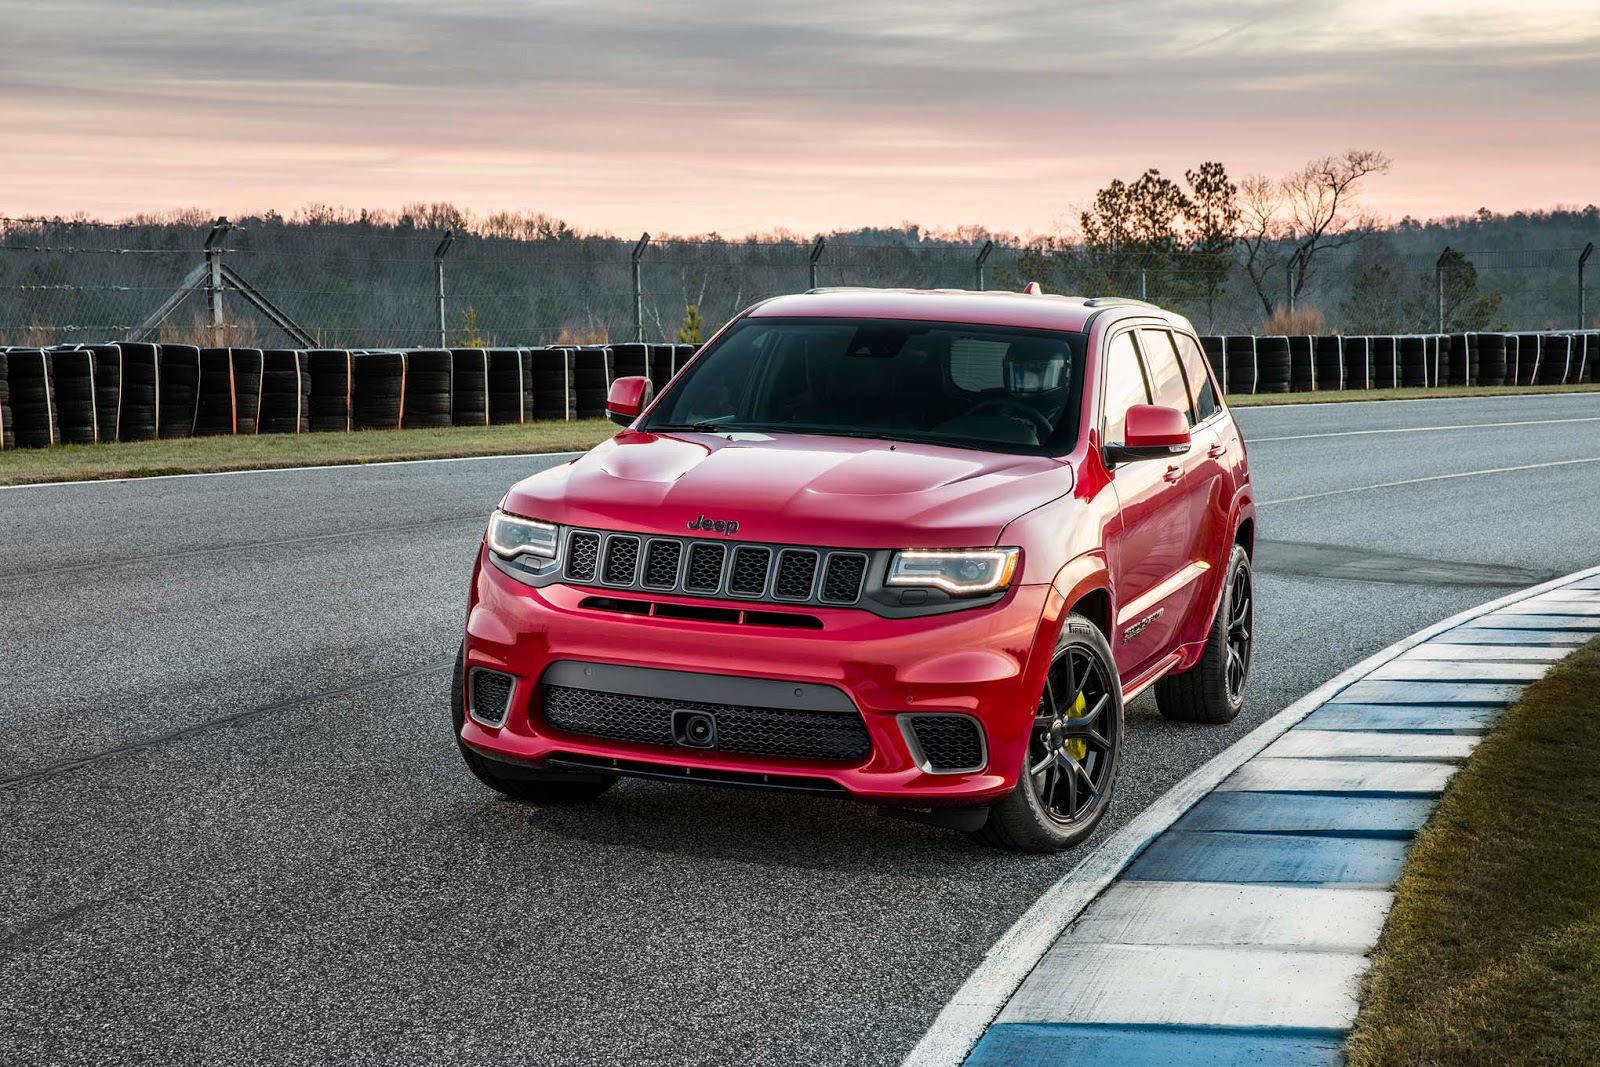 Jeeps Most Expensive Model Yet Is The 2018 Grand Cherokee Trackhawk